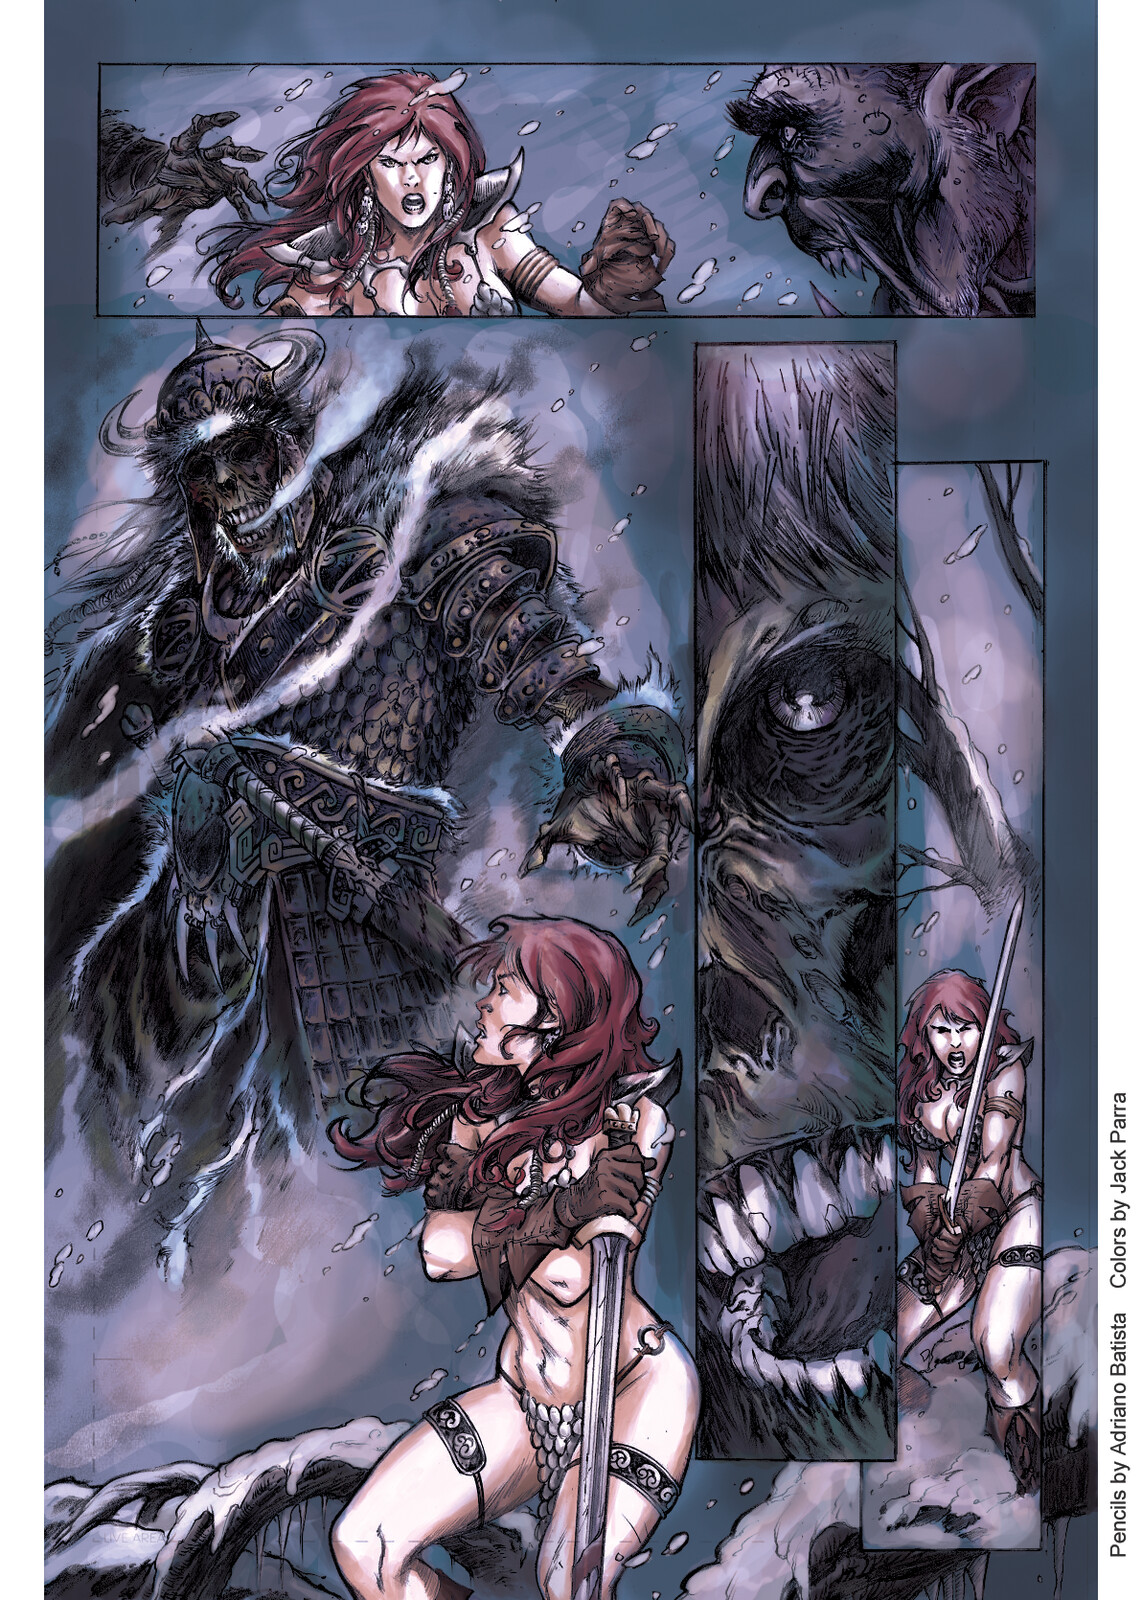 Red Sonja
Collaborative Piece.
Lines by Adriano Batista
Colors by me